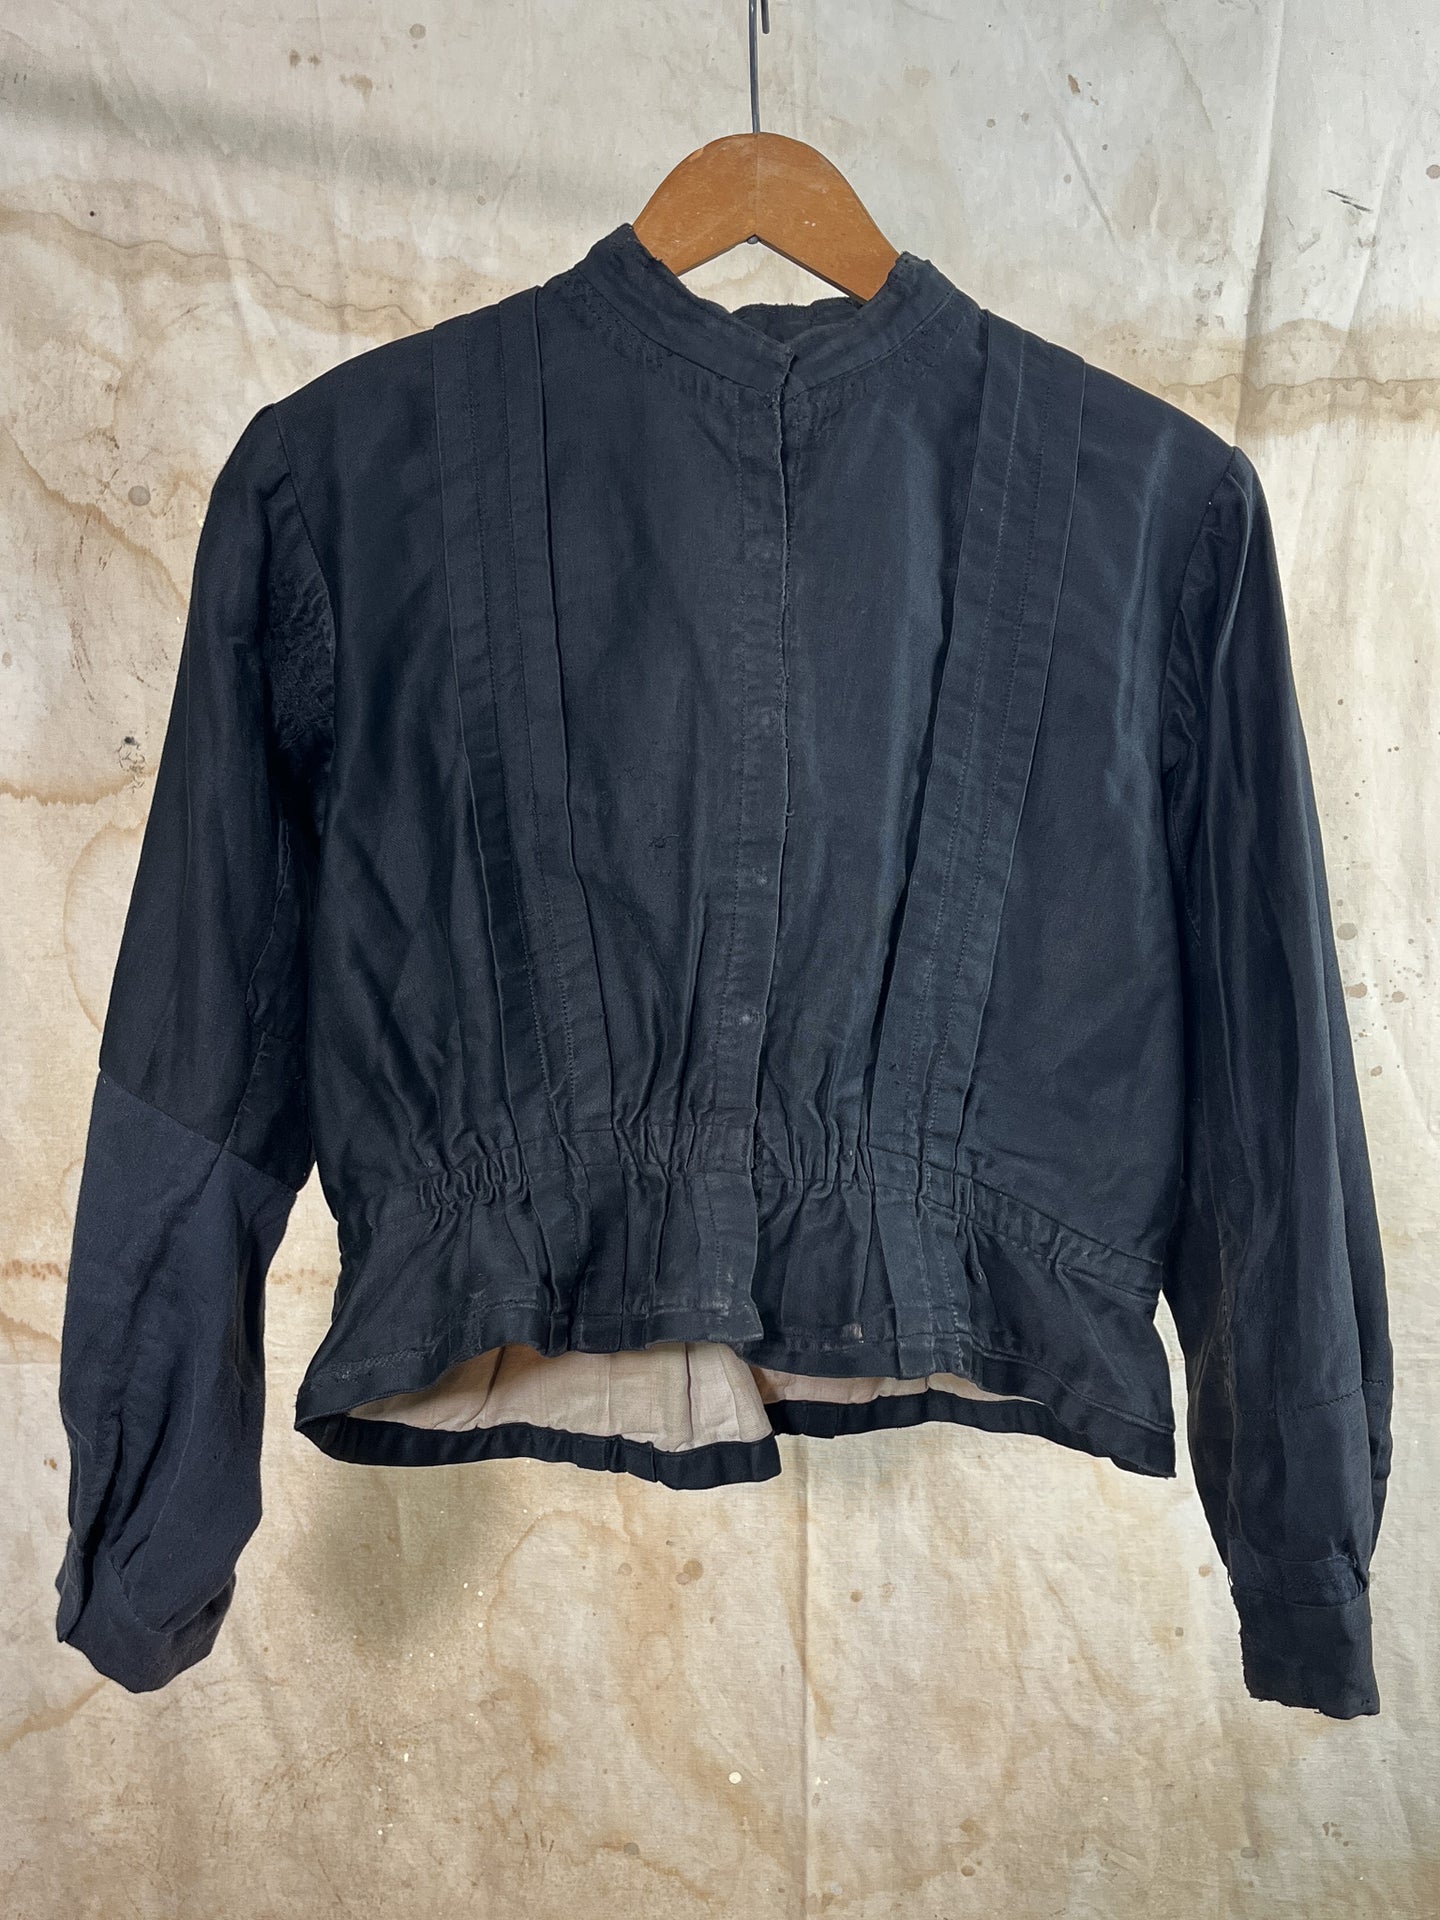 French Black Cotton Work Blouse/ Corset Cover c. late 1800s